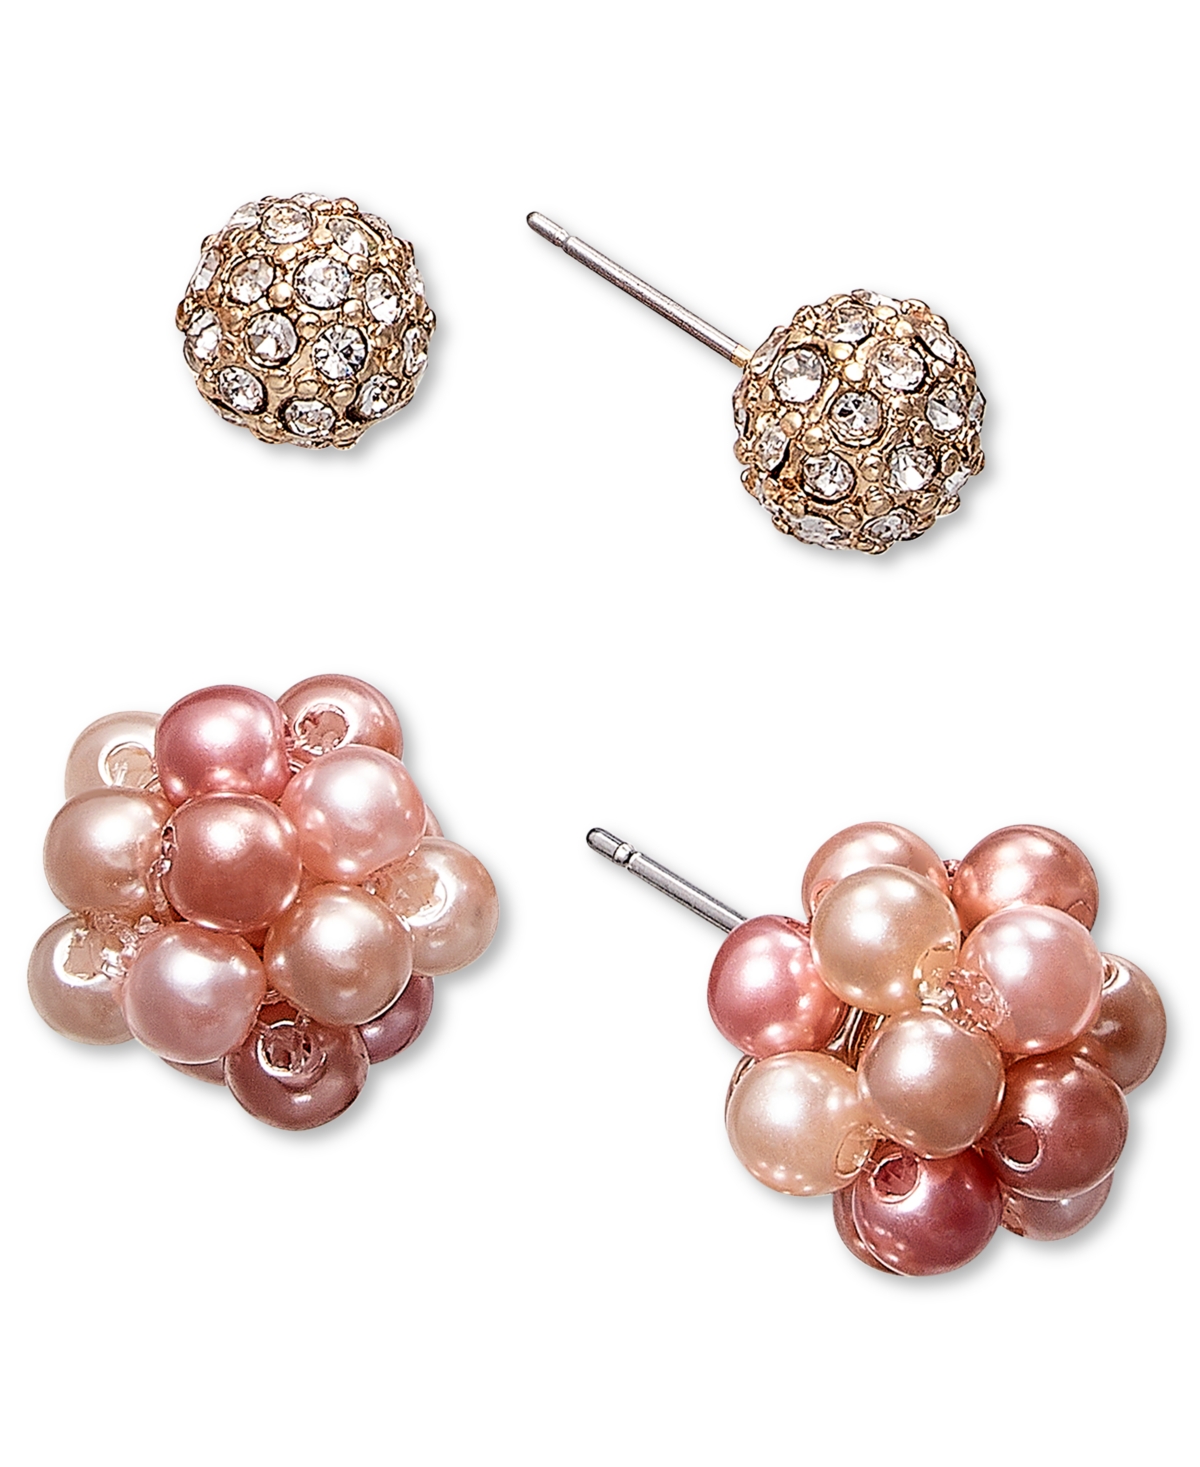 Gold-Tone 2-Pc. Set Imitation Pearl Cluster & Crystal Fireball Stud Earrings, Created for Macy's - Multi